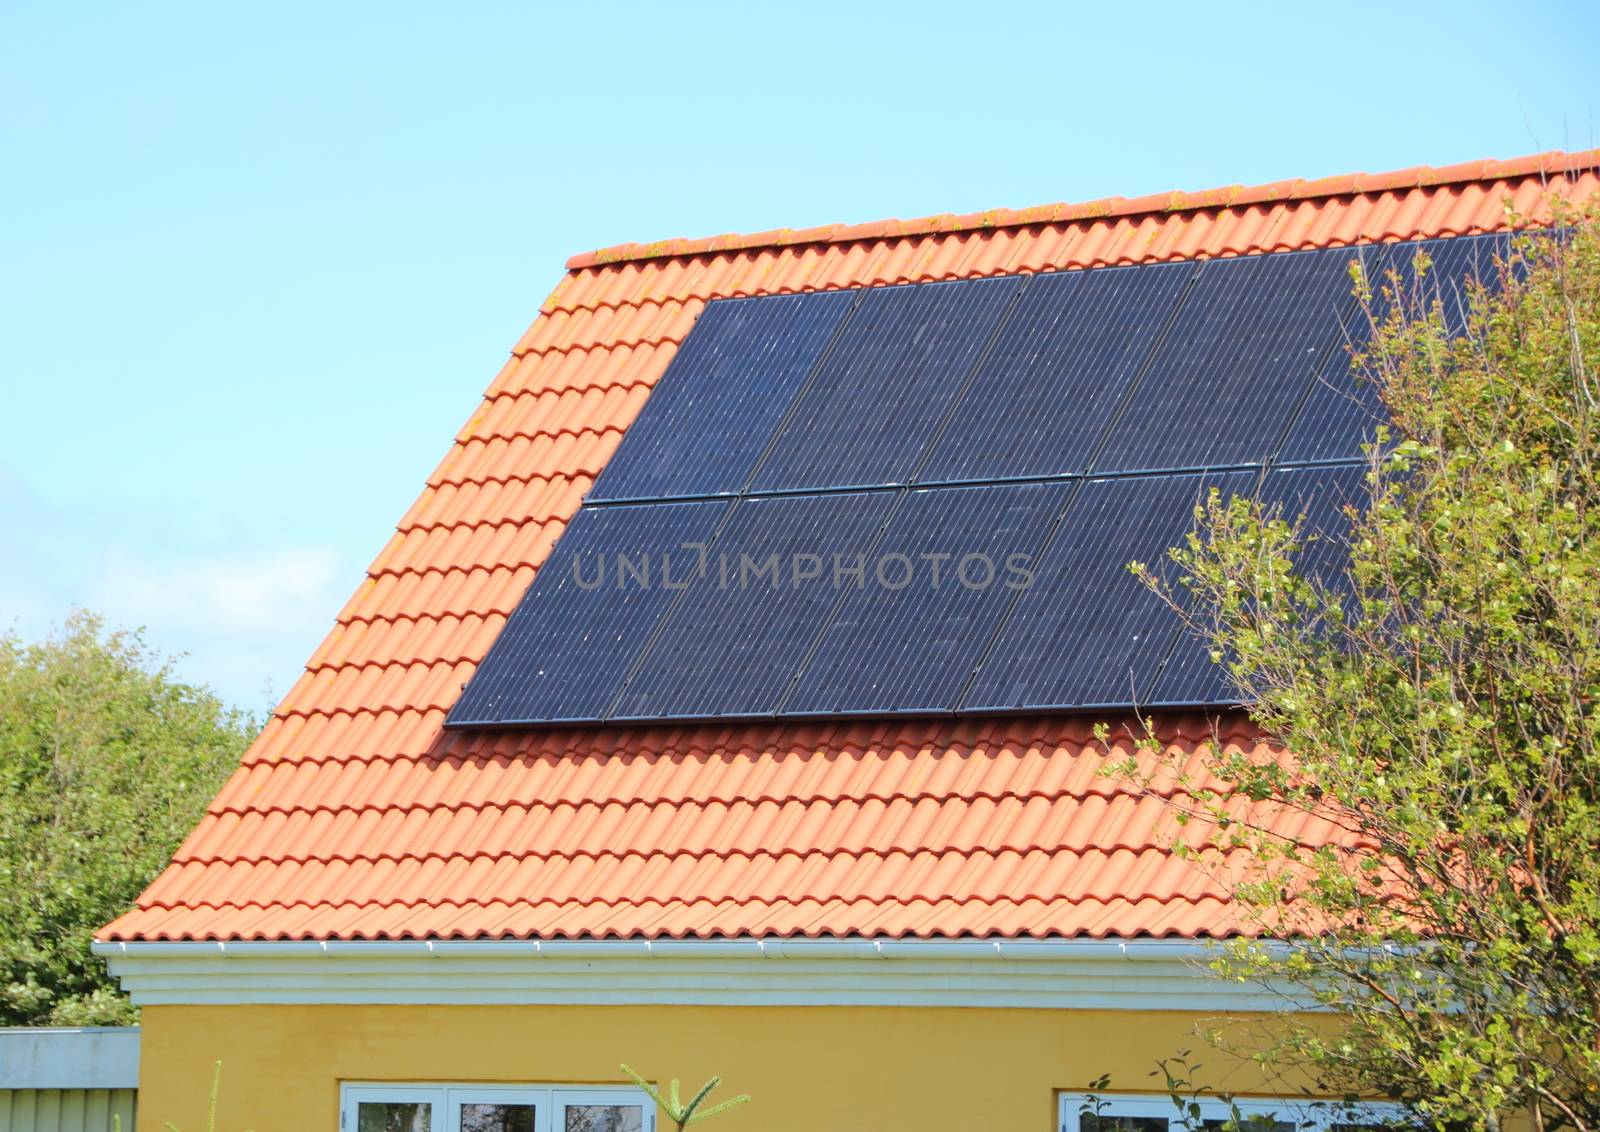 Solar panel on House Roof with Red Tiles by HoleInTheBox